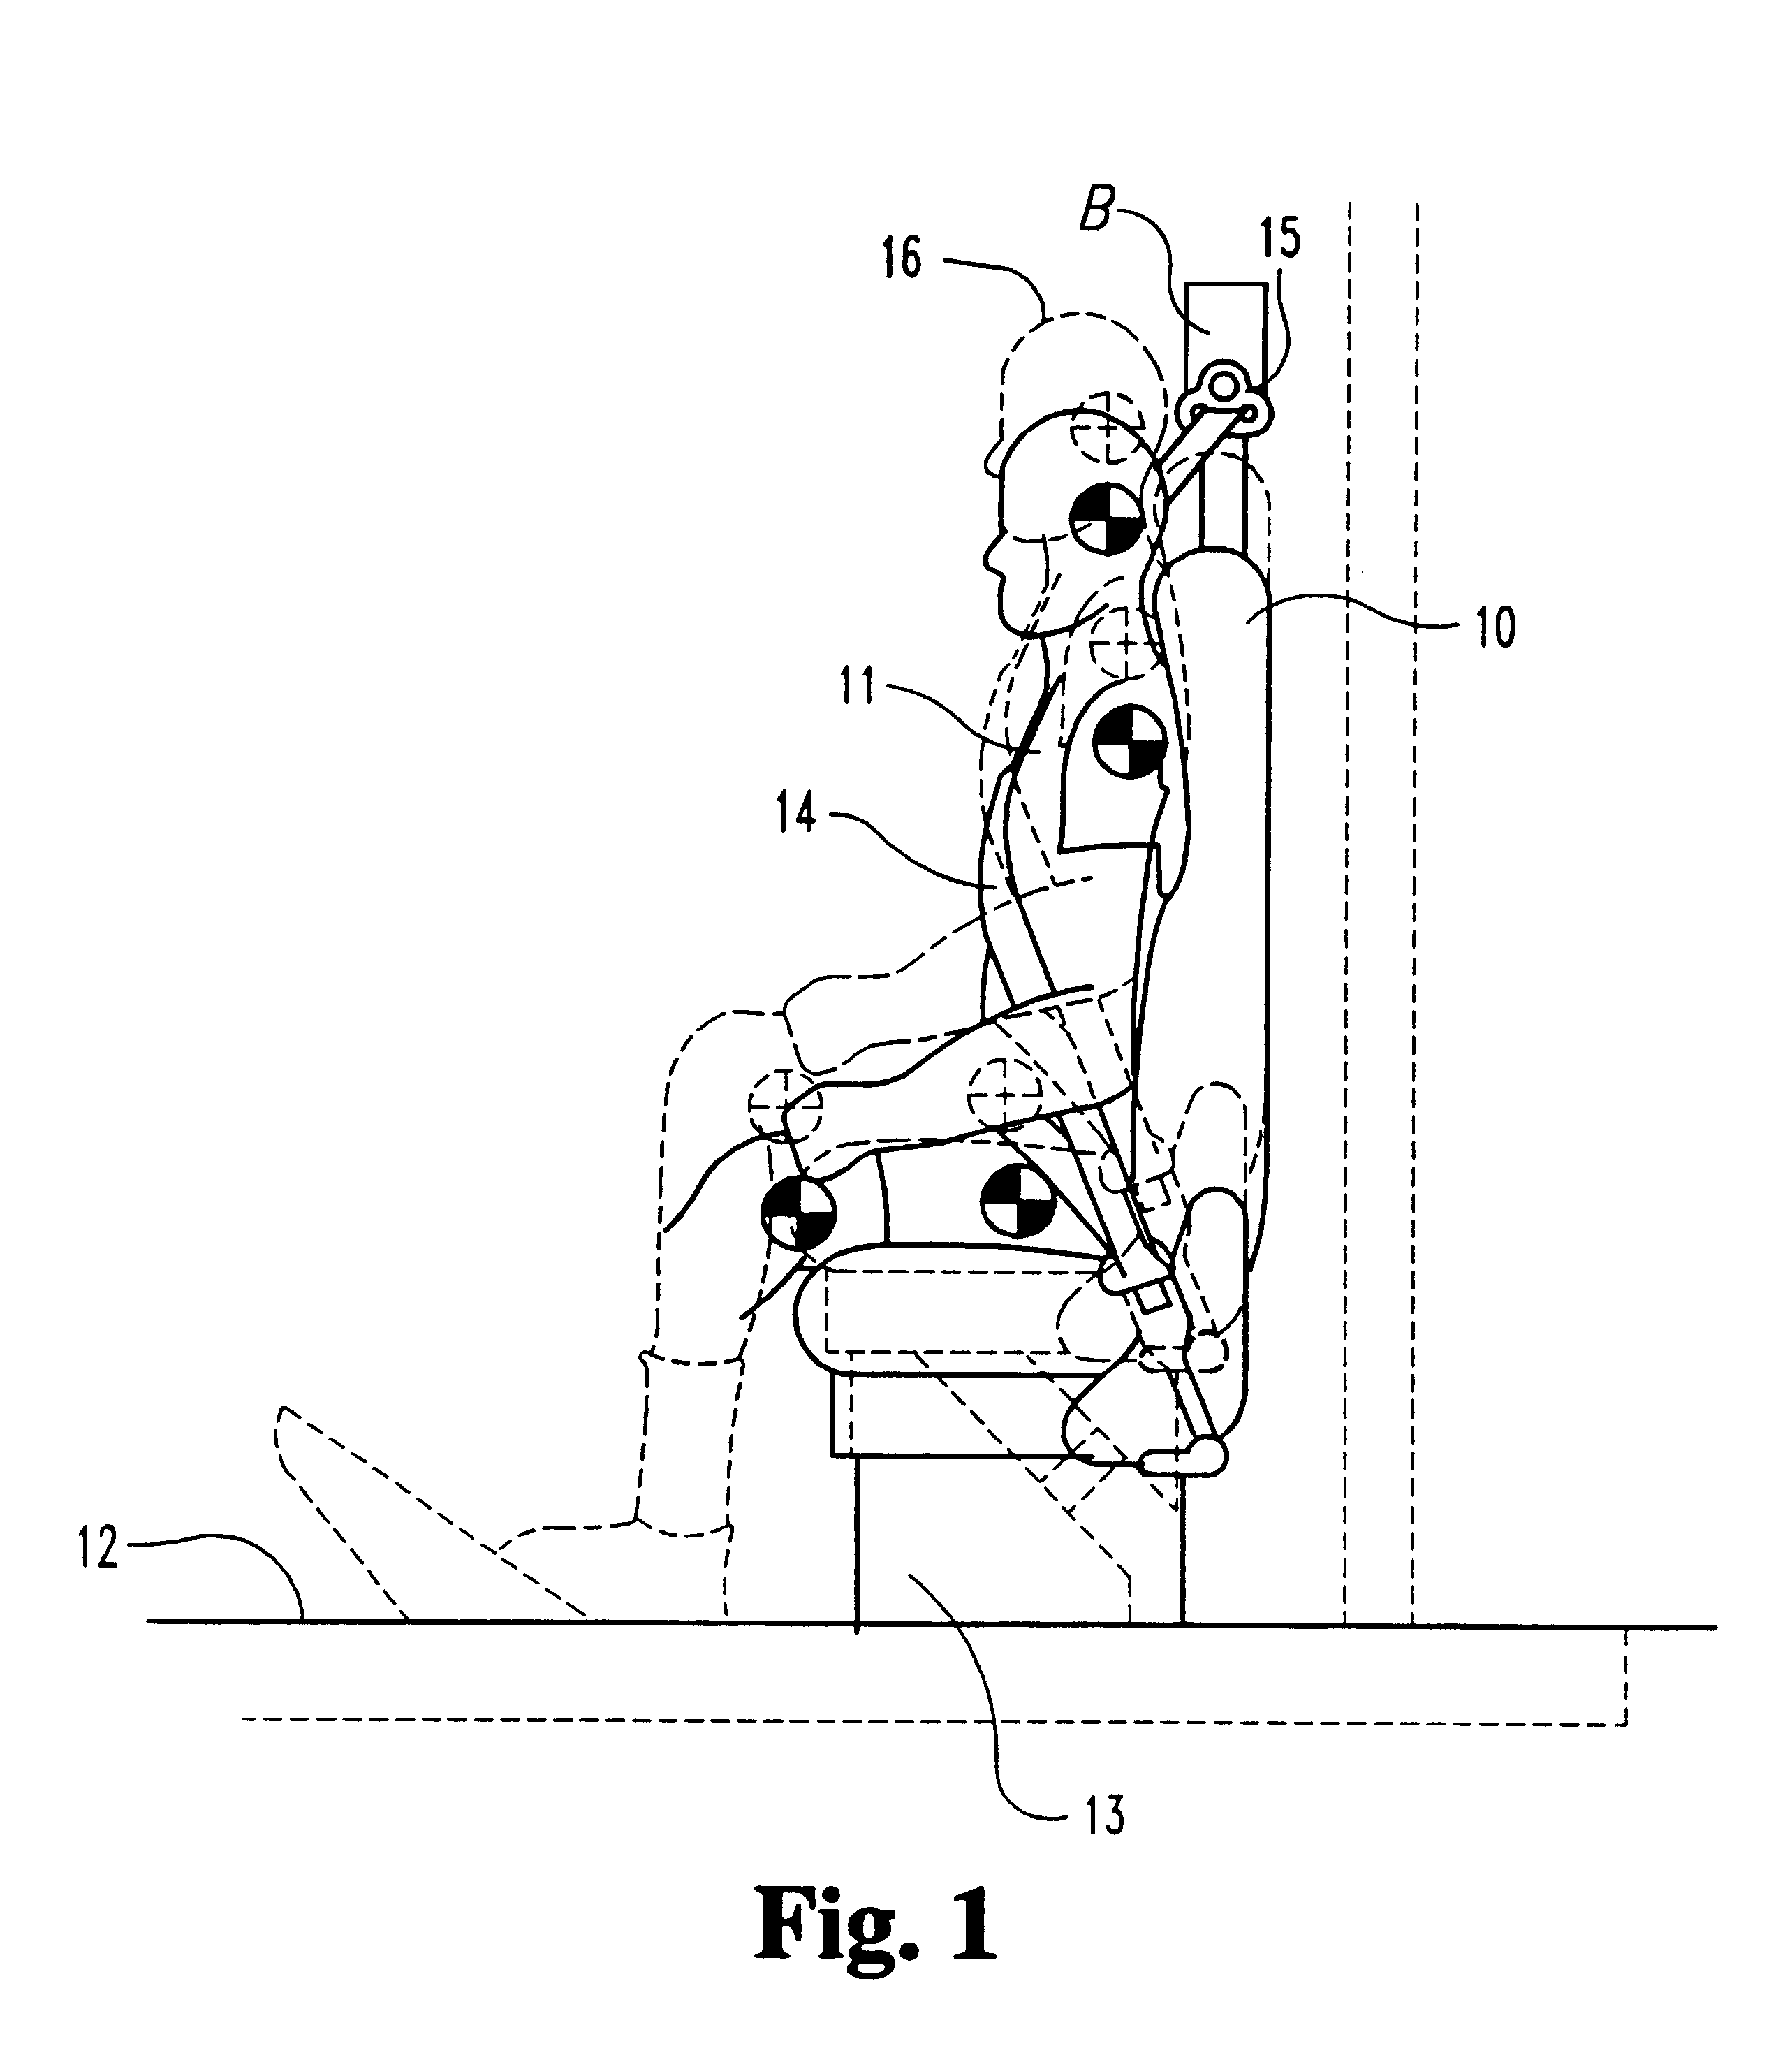 Seat and occupant restraint system